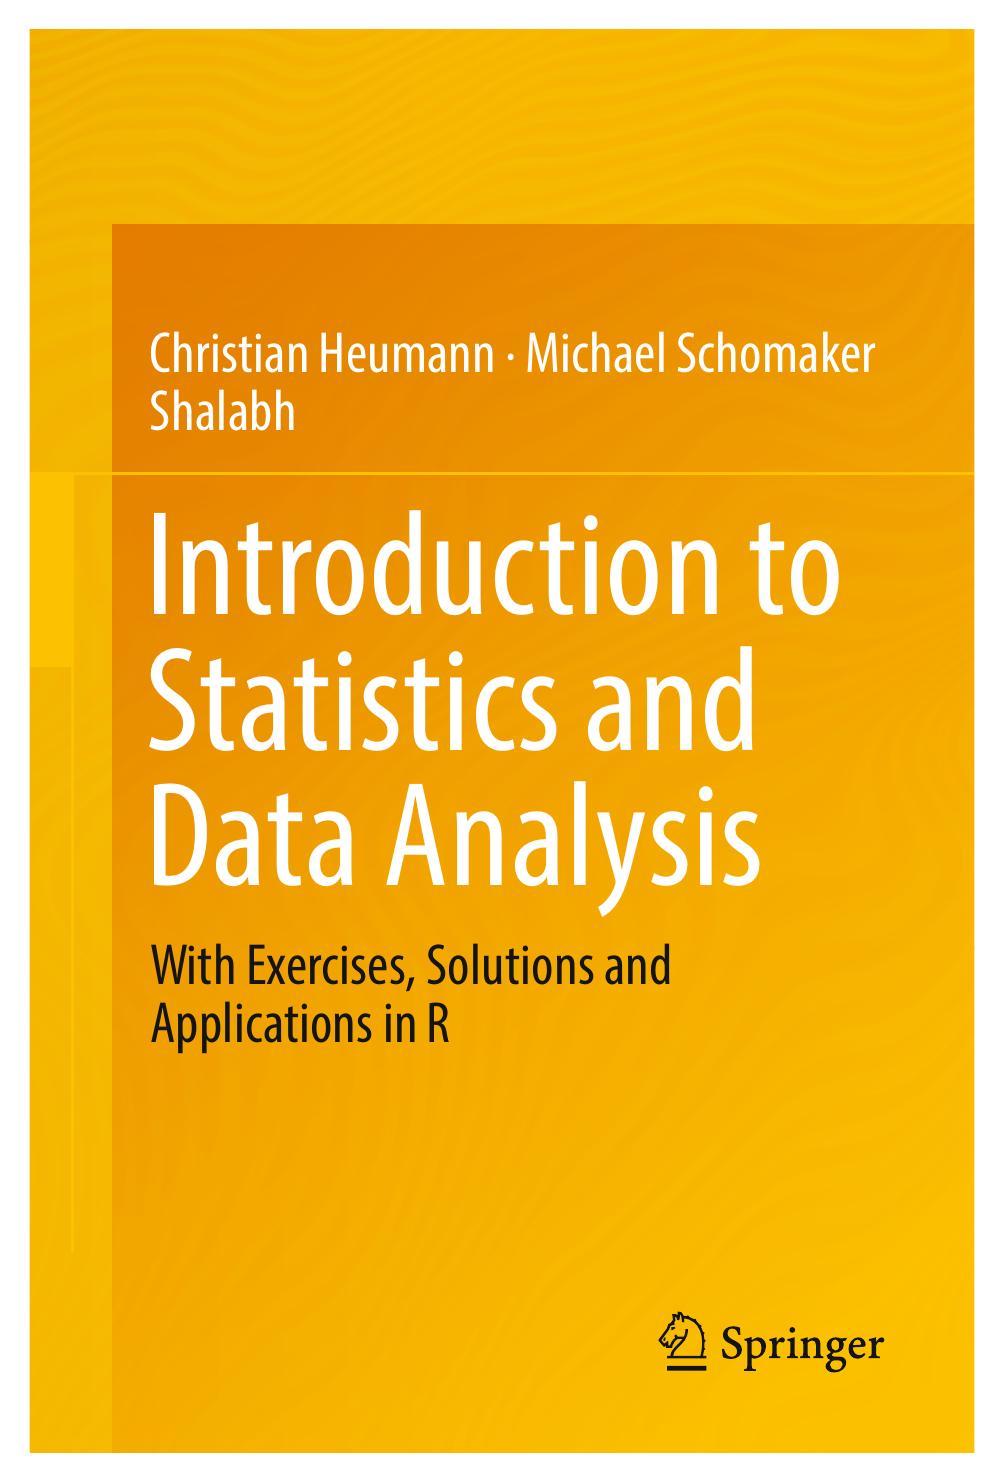 Introduction to Statistics and Data Analysis   With Exercises, Solutions and Applications in R 2016